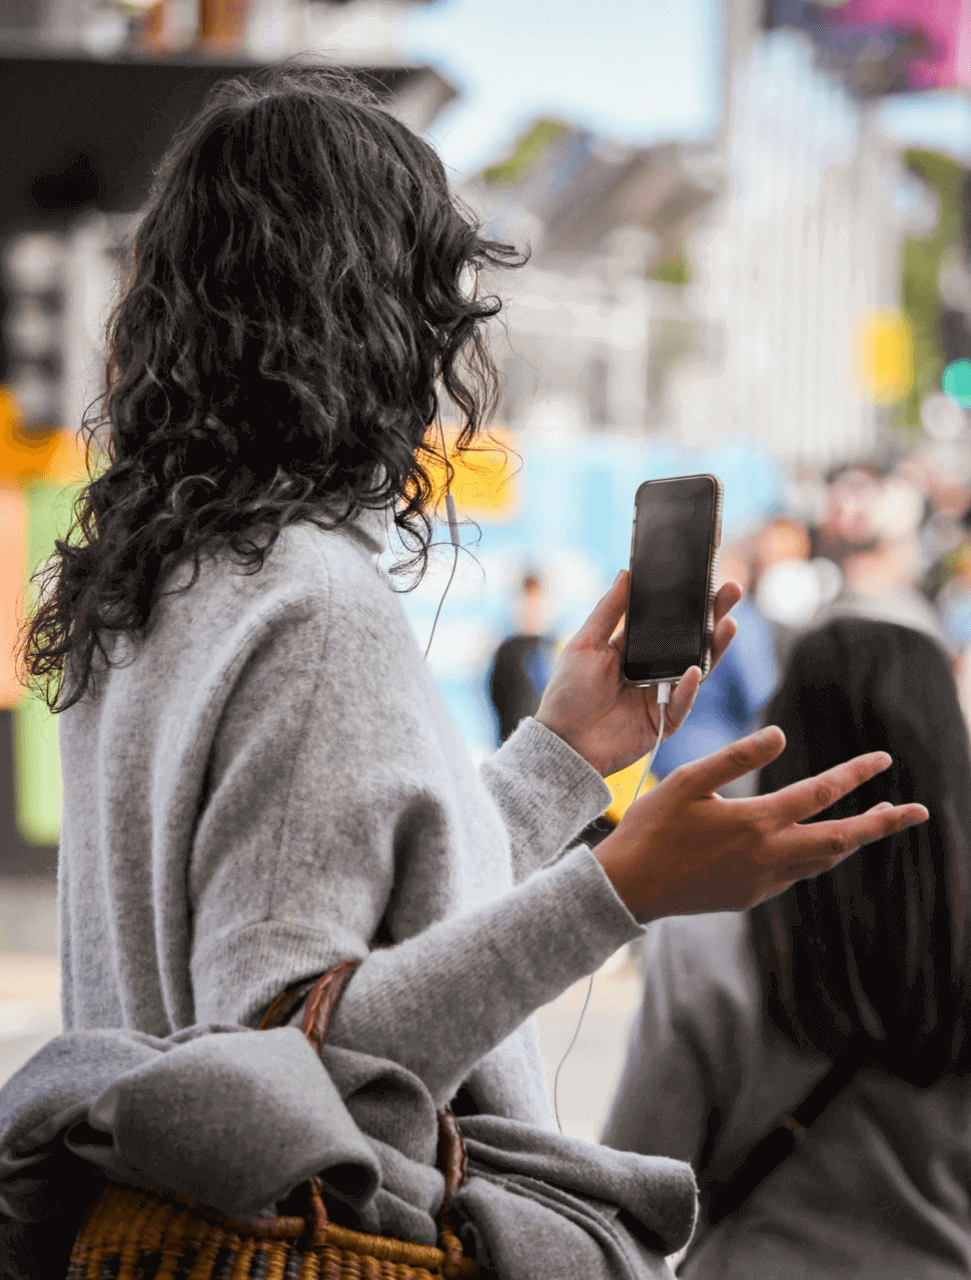 Woman using video call function while walking on the street